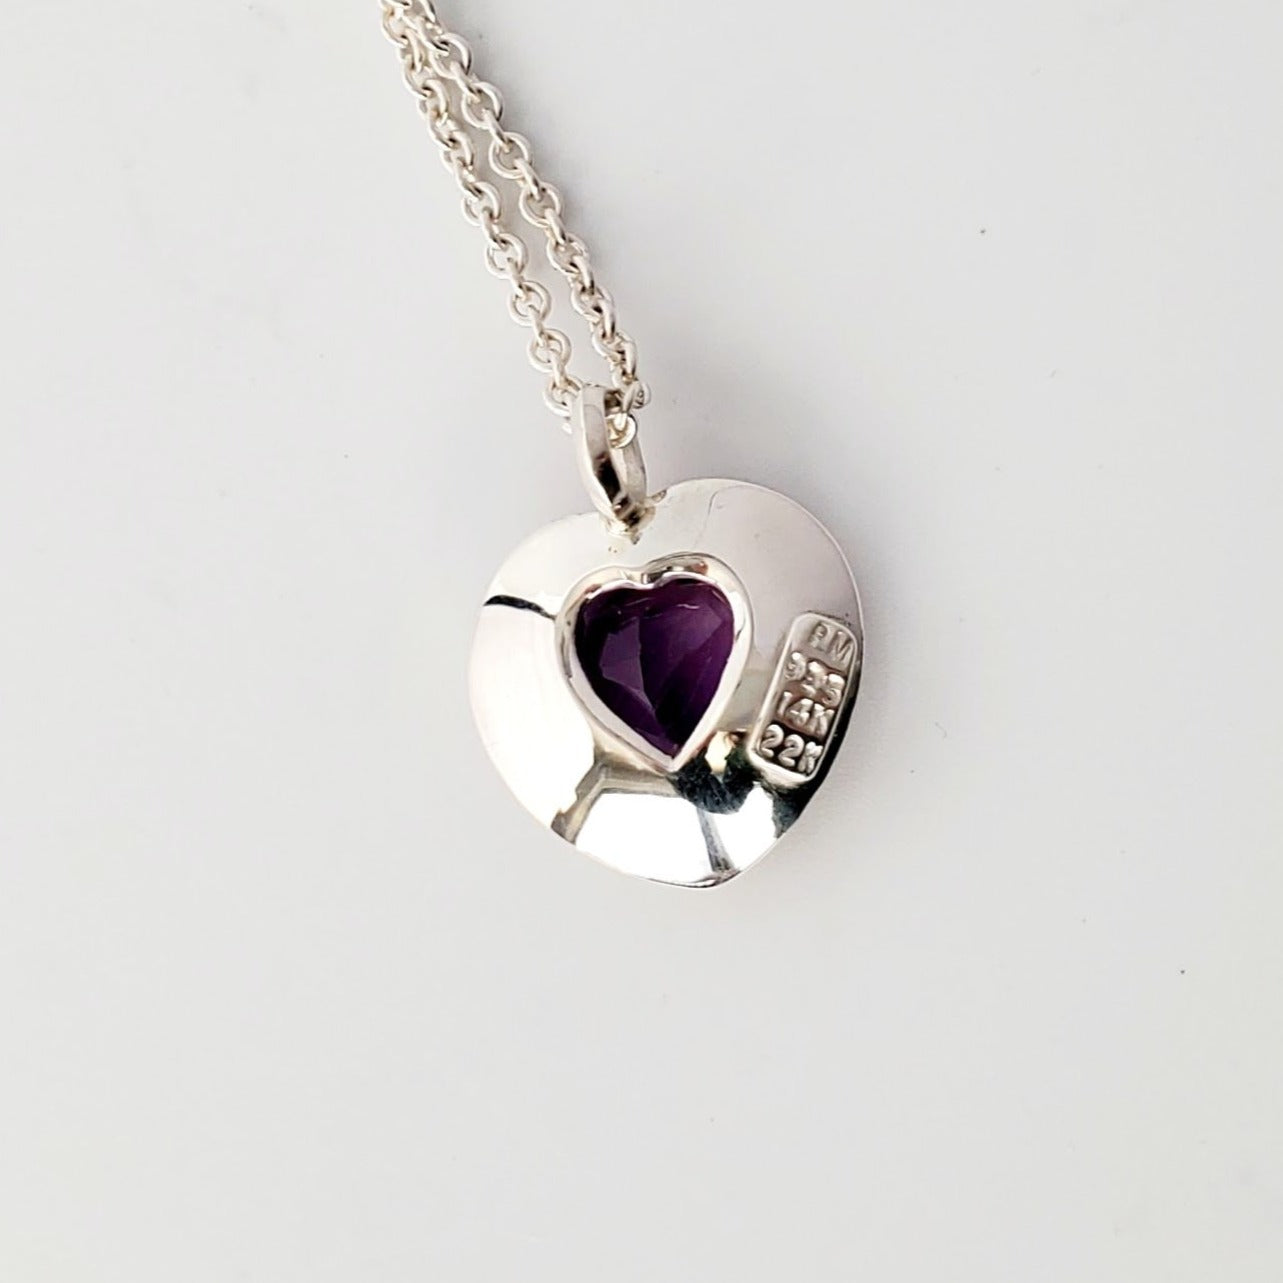 FACETED AMETHYST HEART WITHIN HEARTS OF 14KT, 22kt & STERLING SILVER